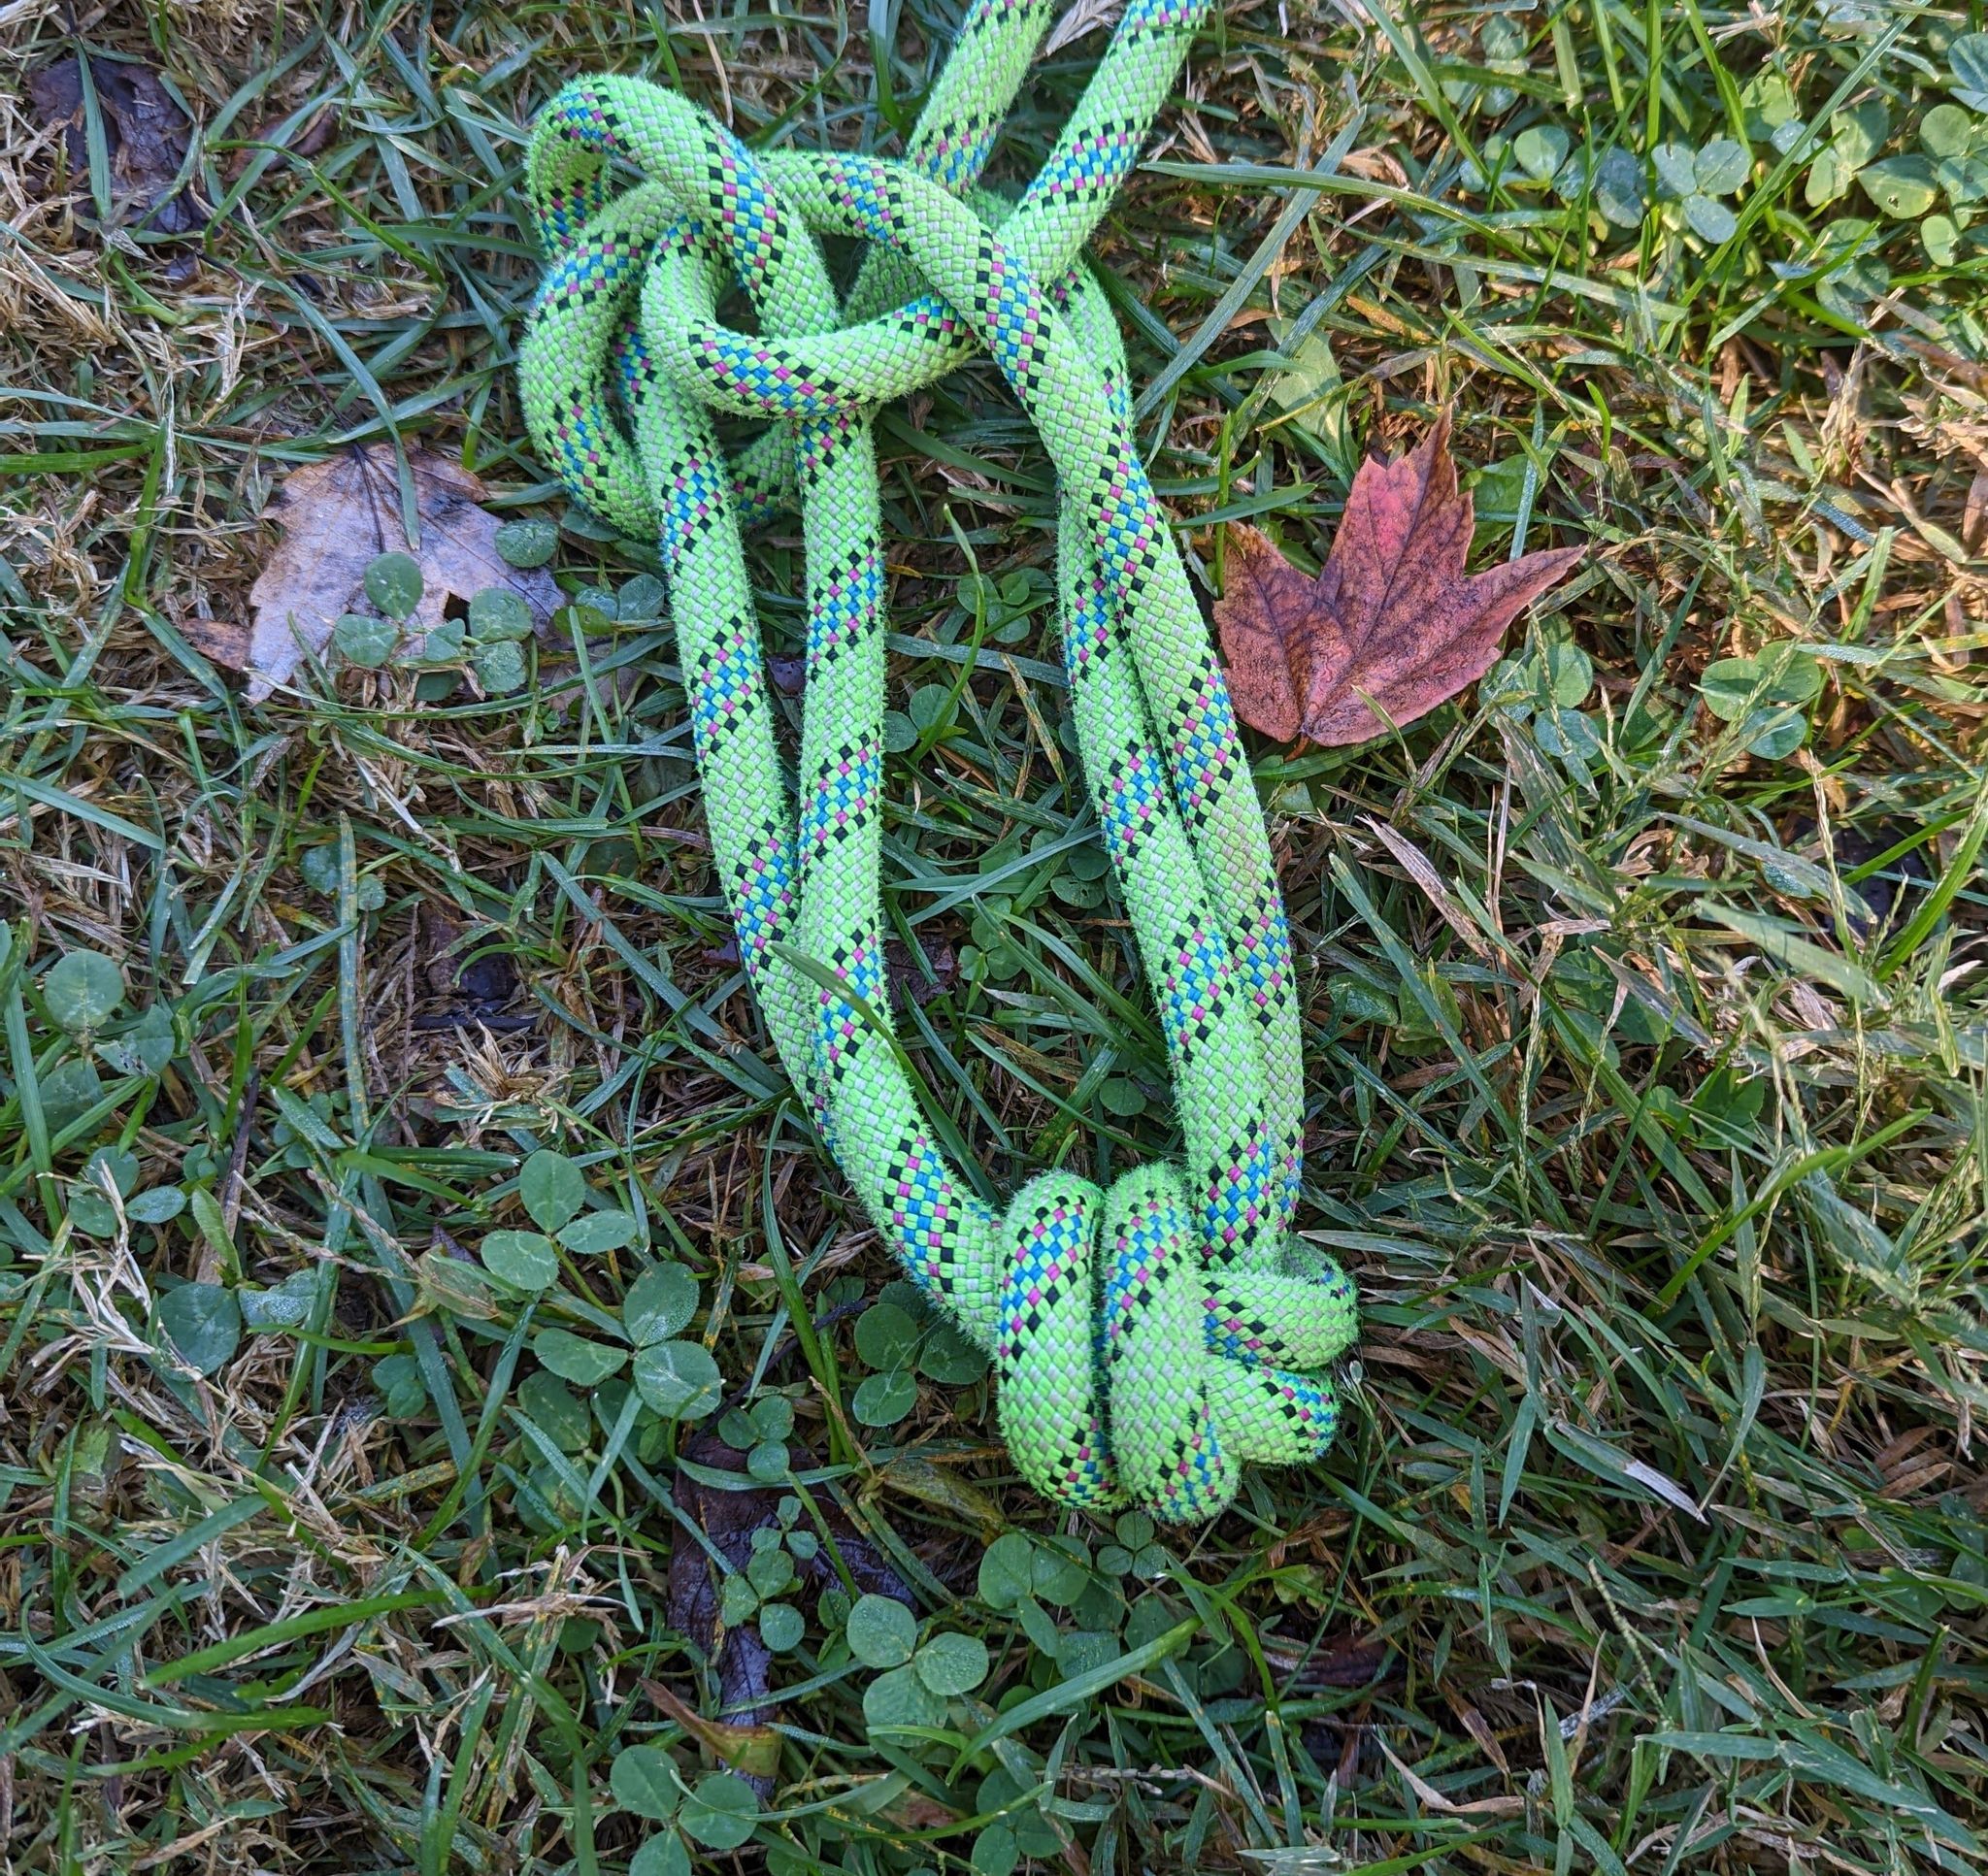 A green rope tied in knots laying in the grass